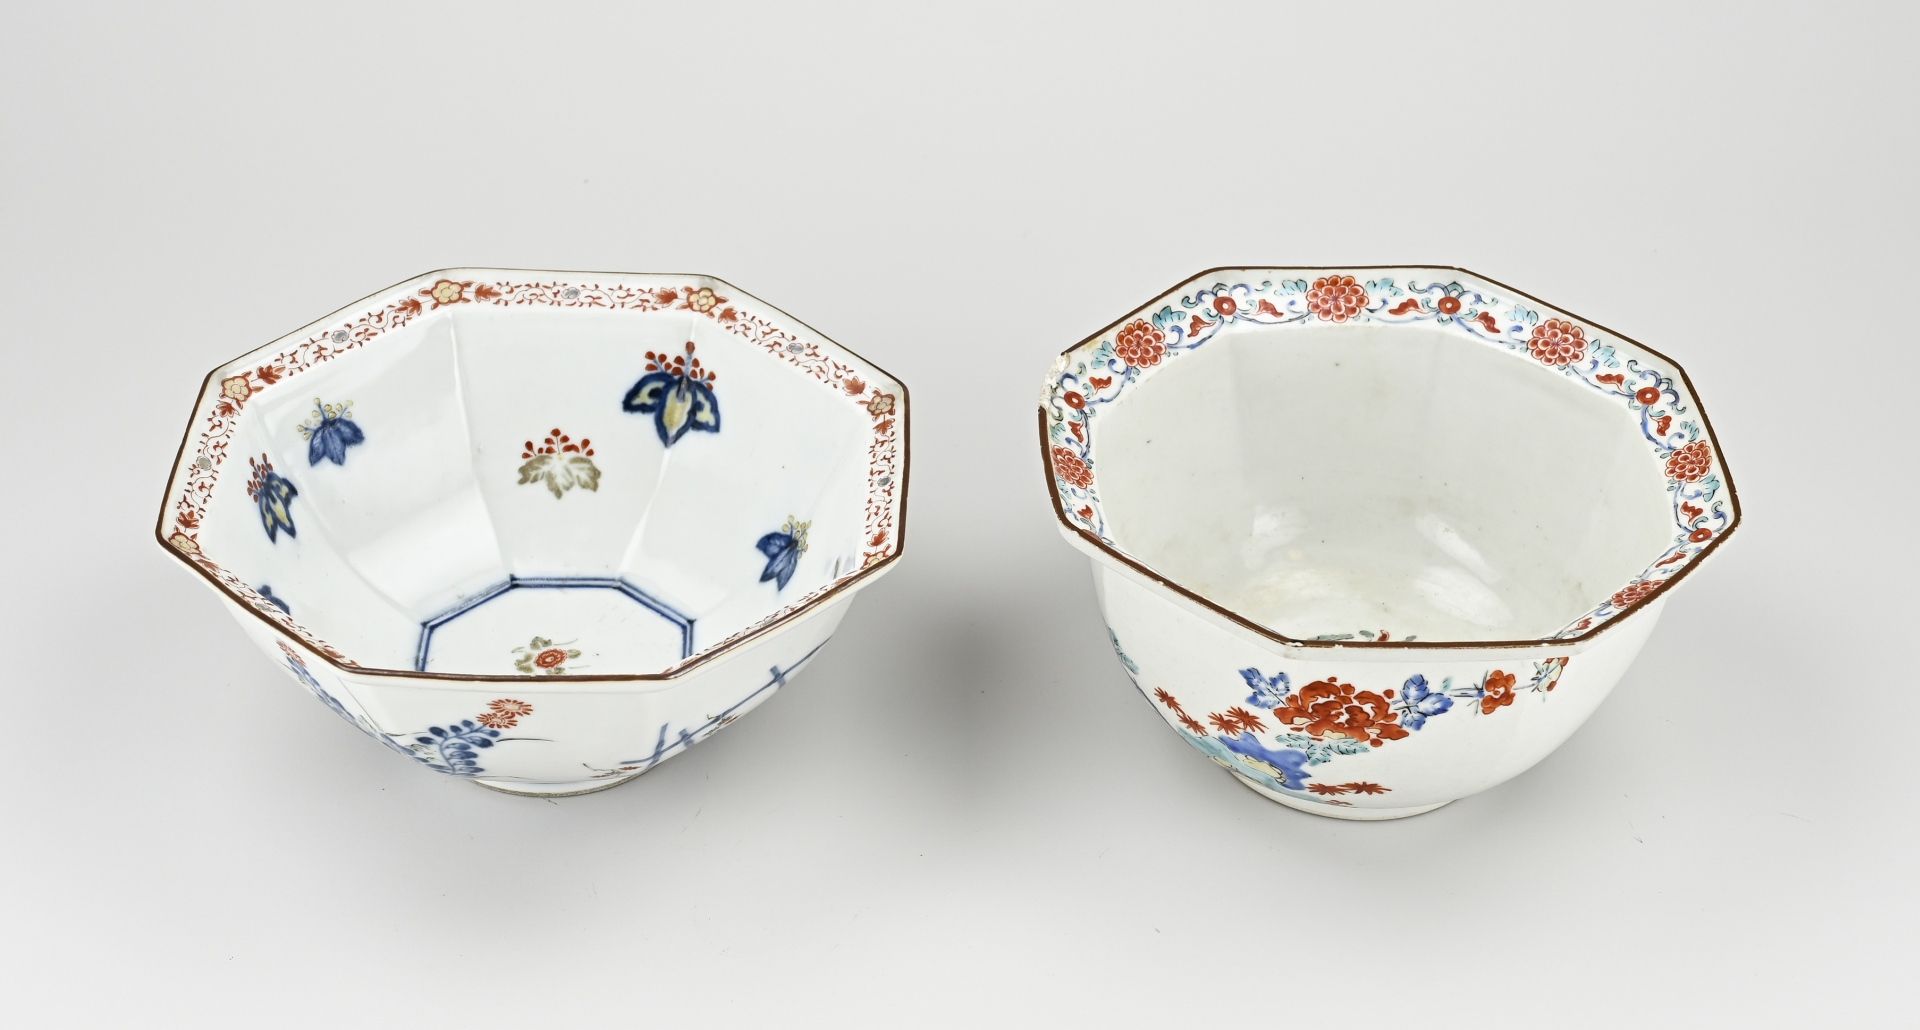 Two Japanese bowls